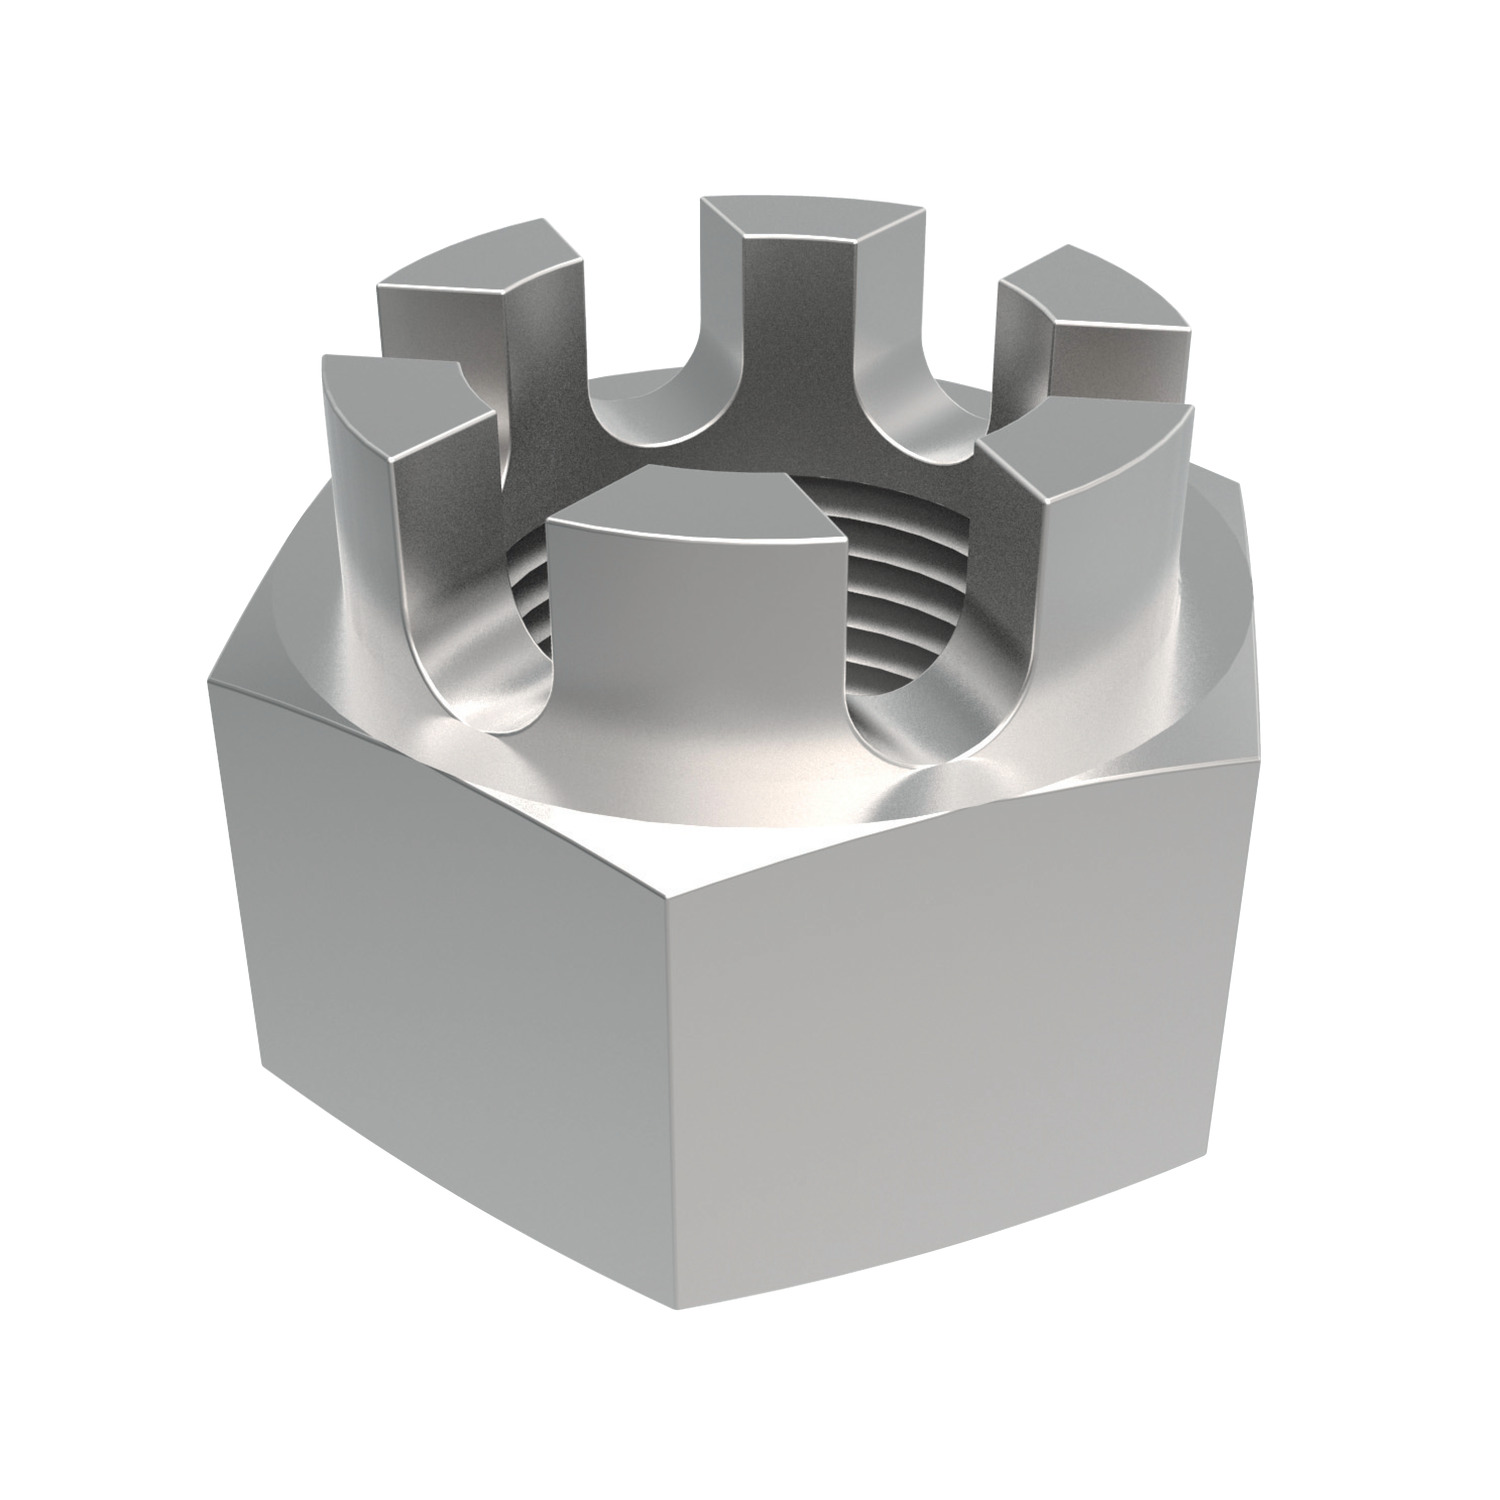 Hexagon Castle Nuts Hexagon castle nuts made from A2 stainless steel. Manufactured to DIN 935. Sizes range from M5 to M36.